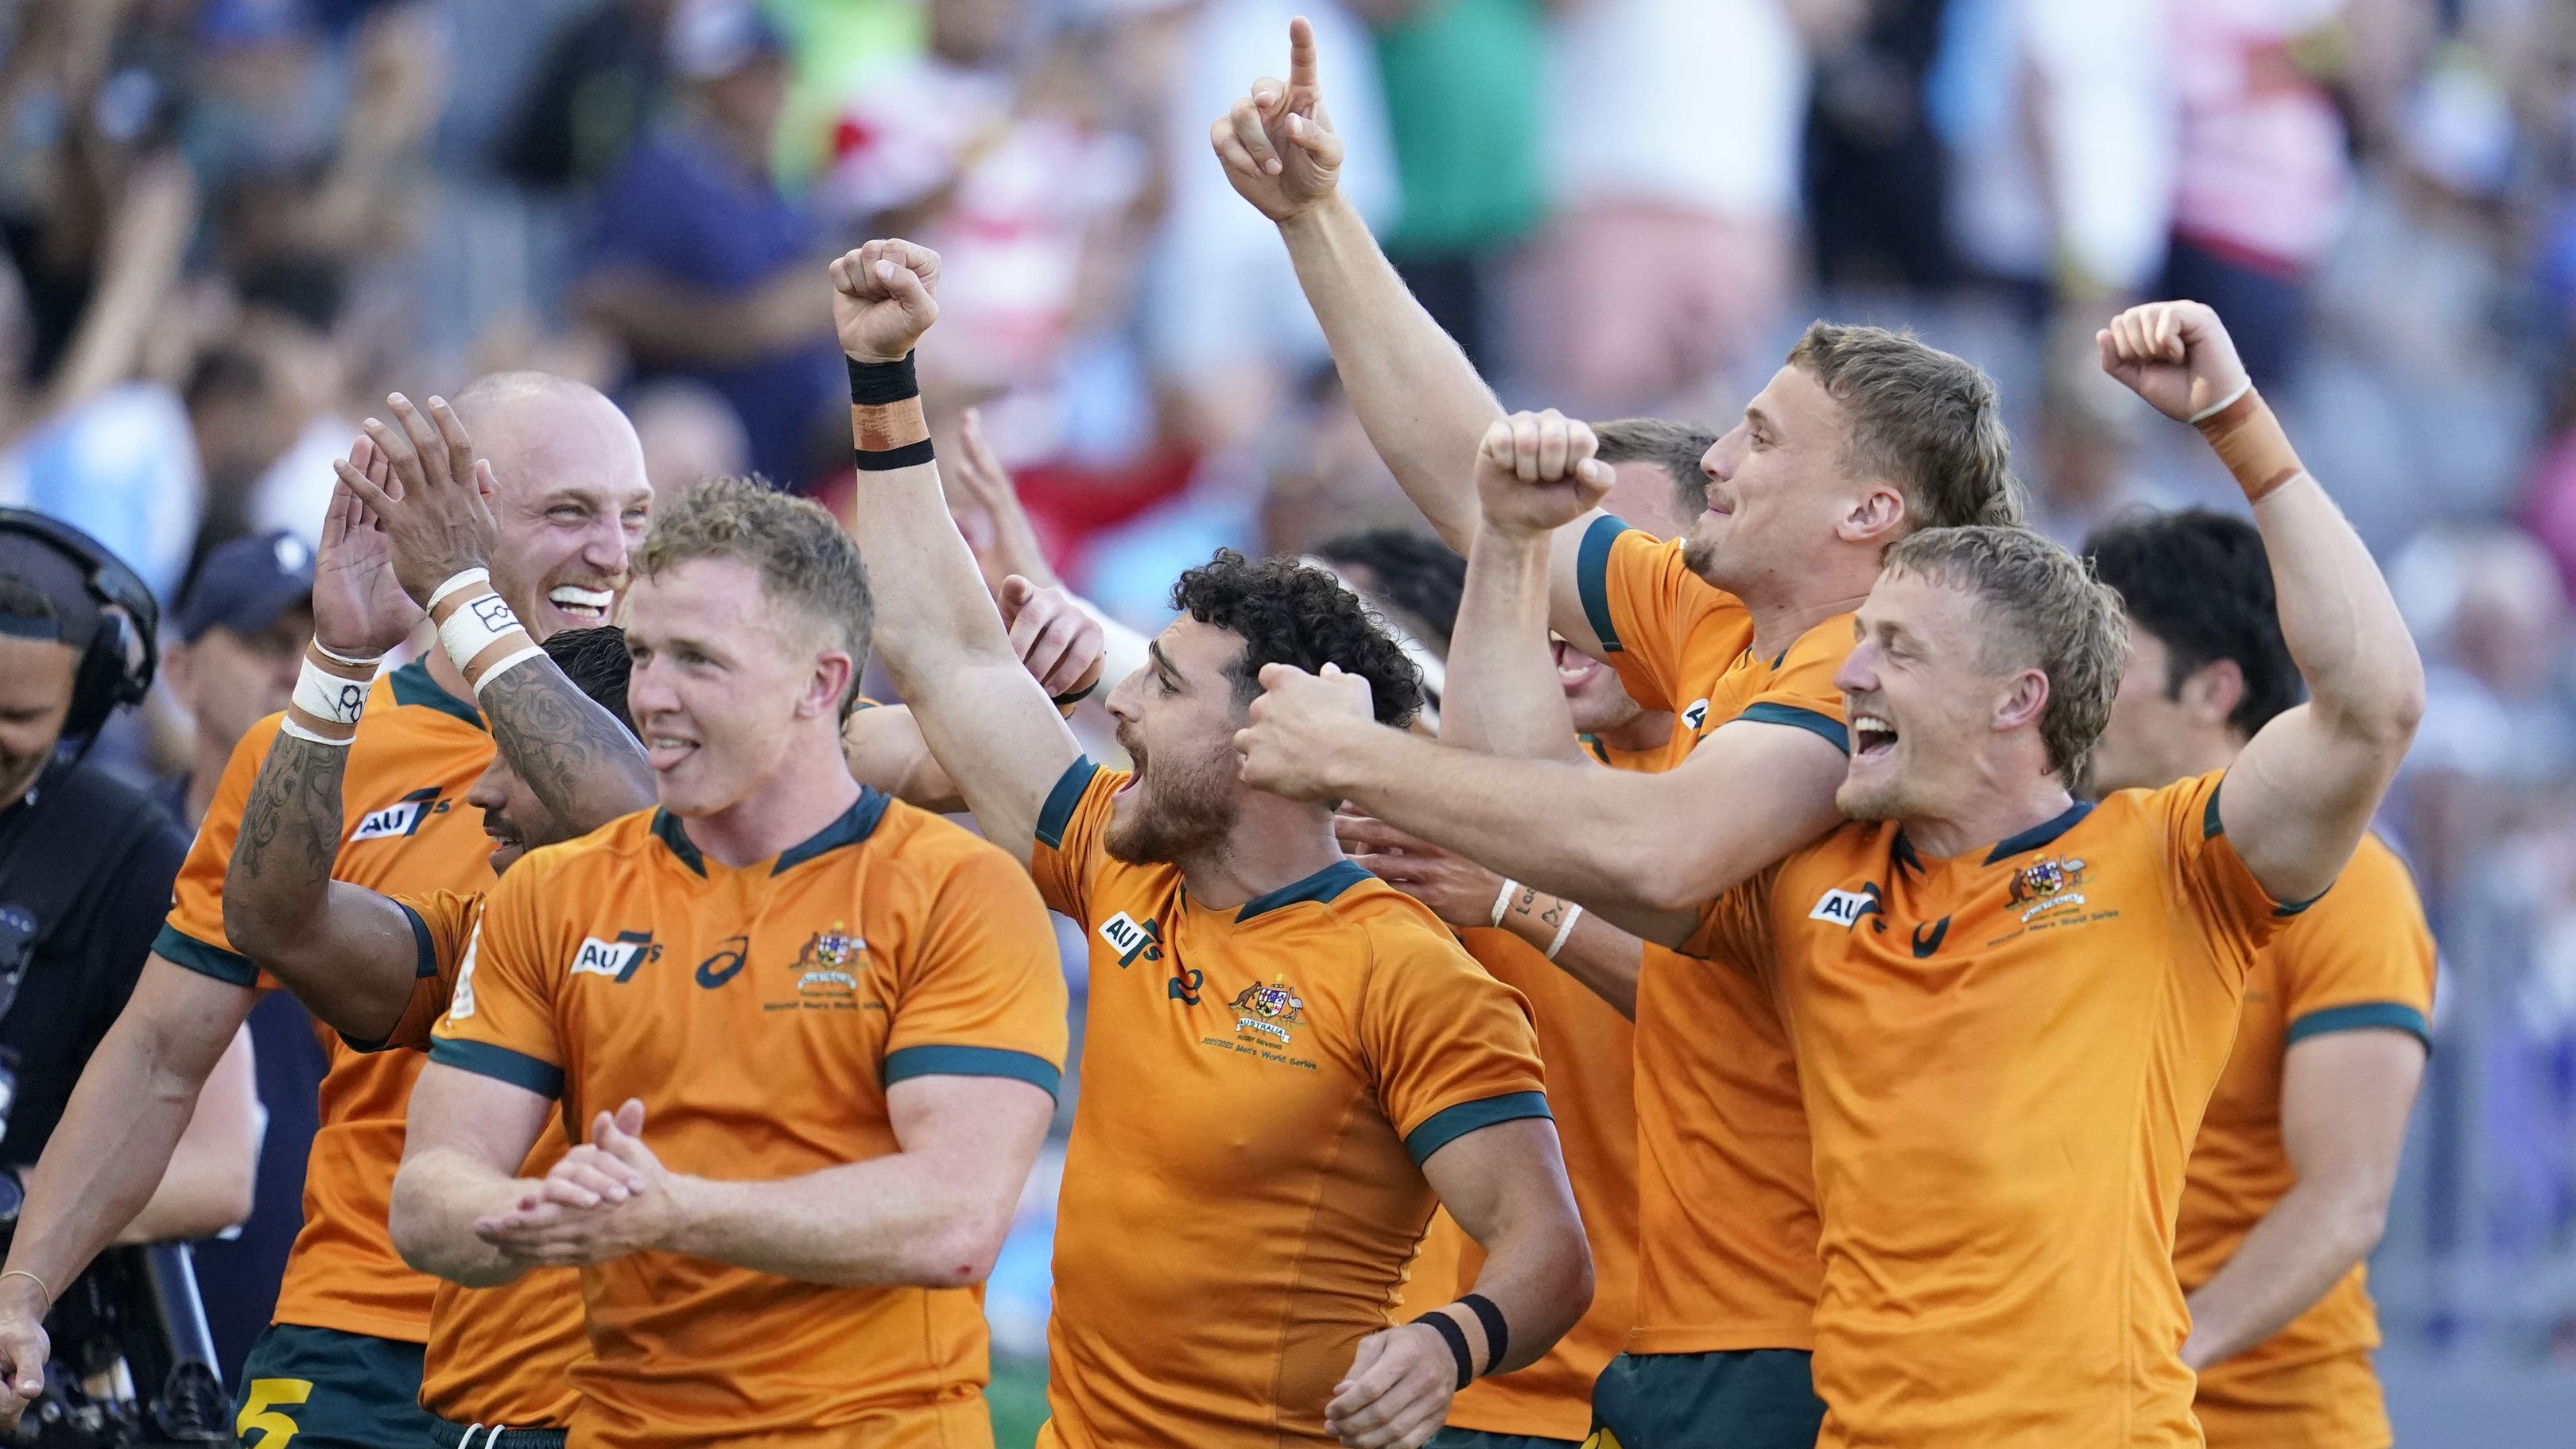 Australia celebrate after defeating Samoa in their bronze medal match.